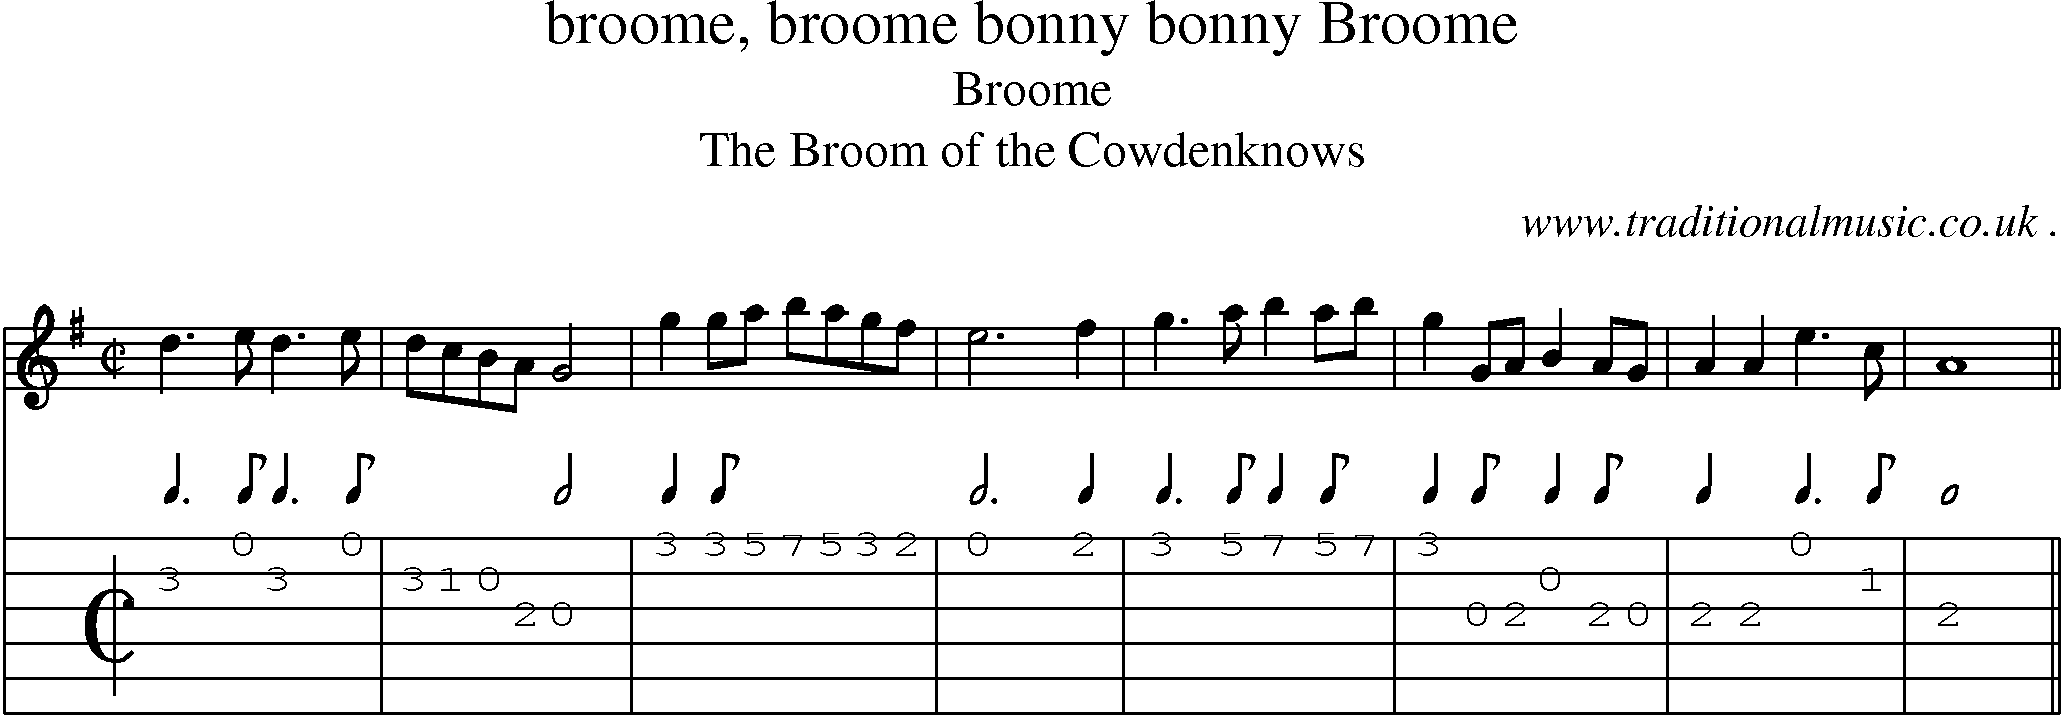 Sheet-Music and Guitar Tabs for Broome Broome Bonny Bonny Broome